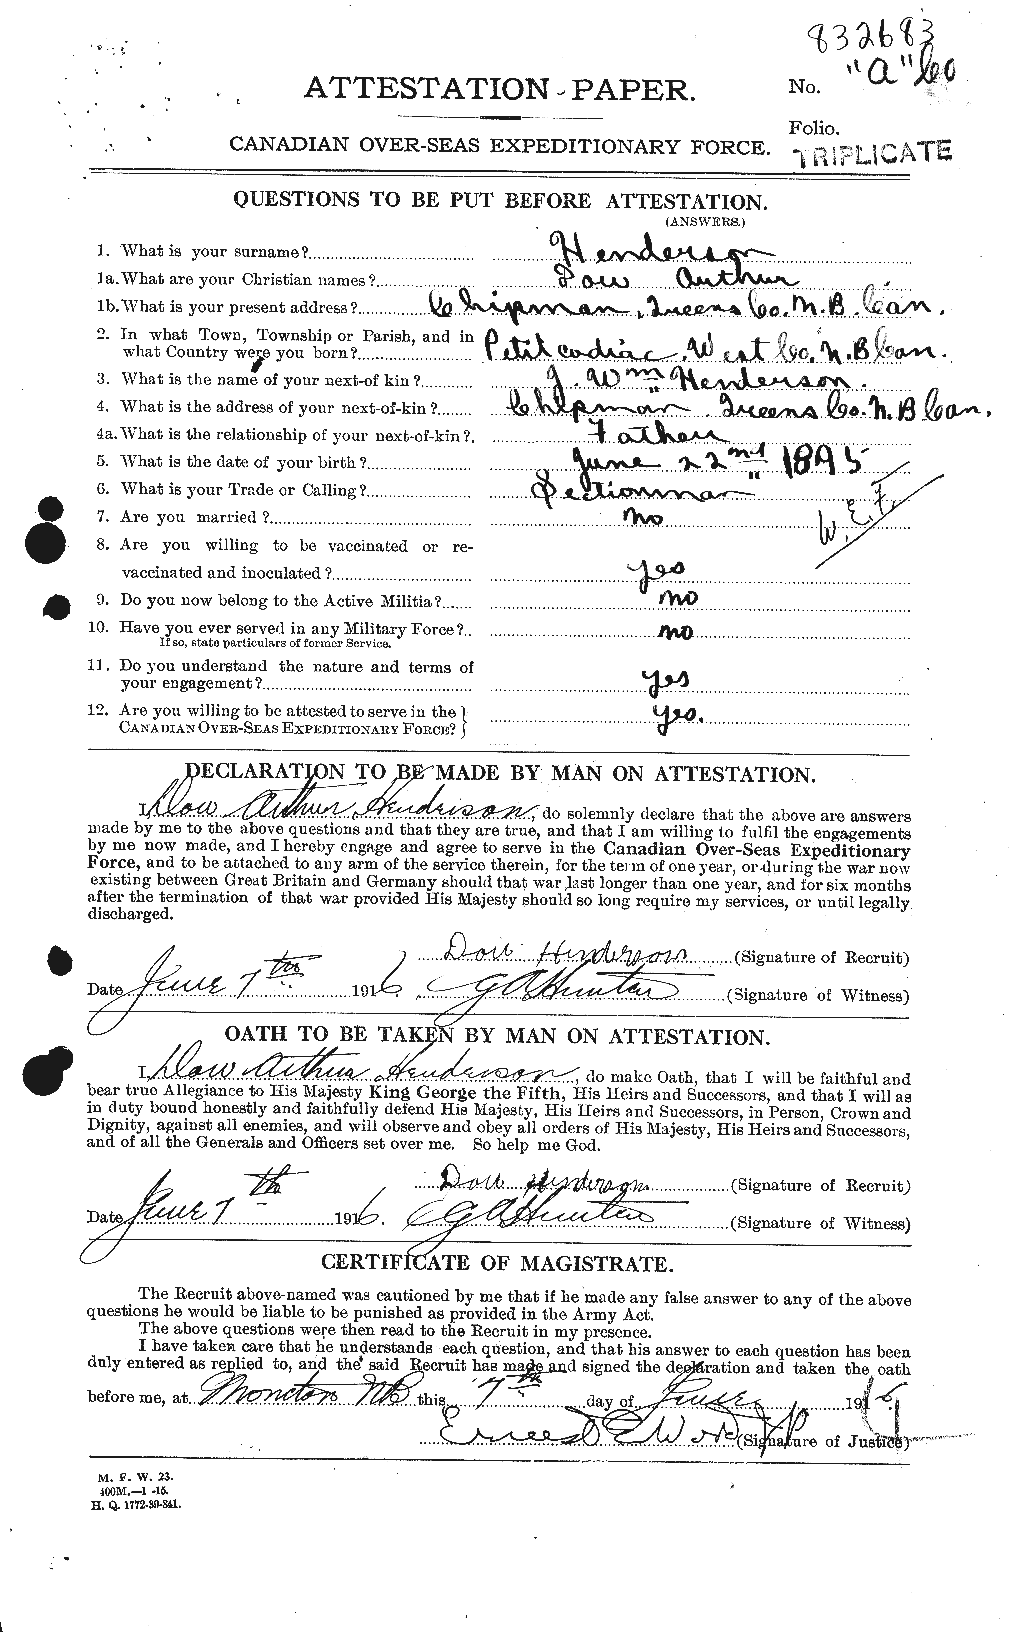 Personnel Records of the First World War - CEF 390145a